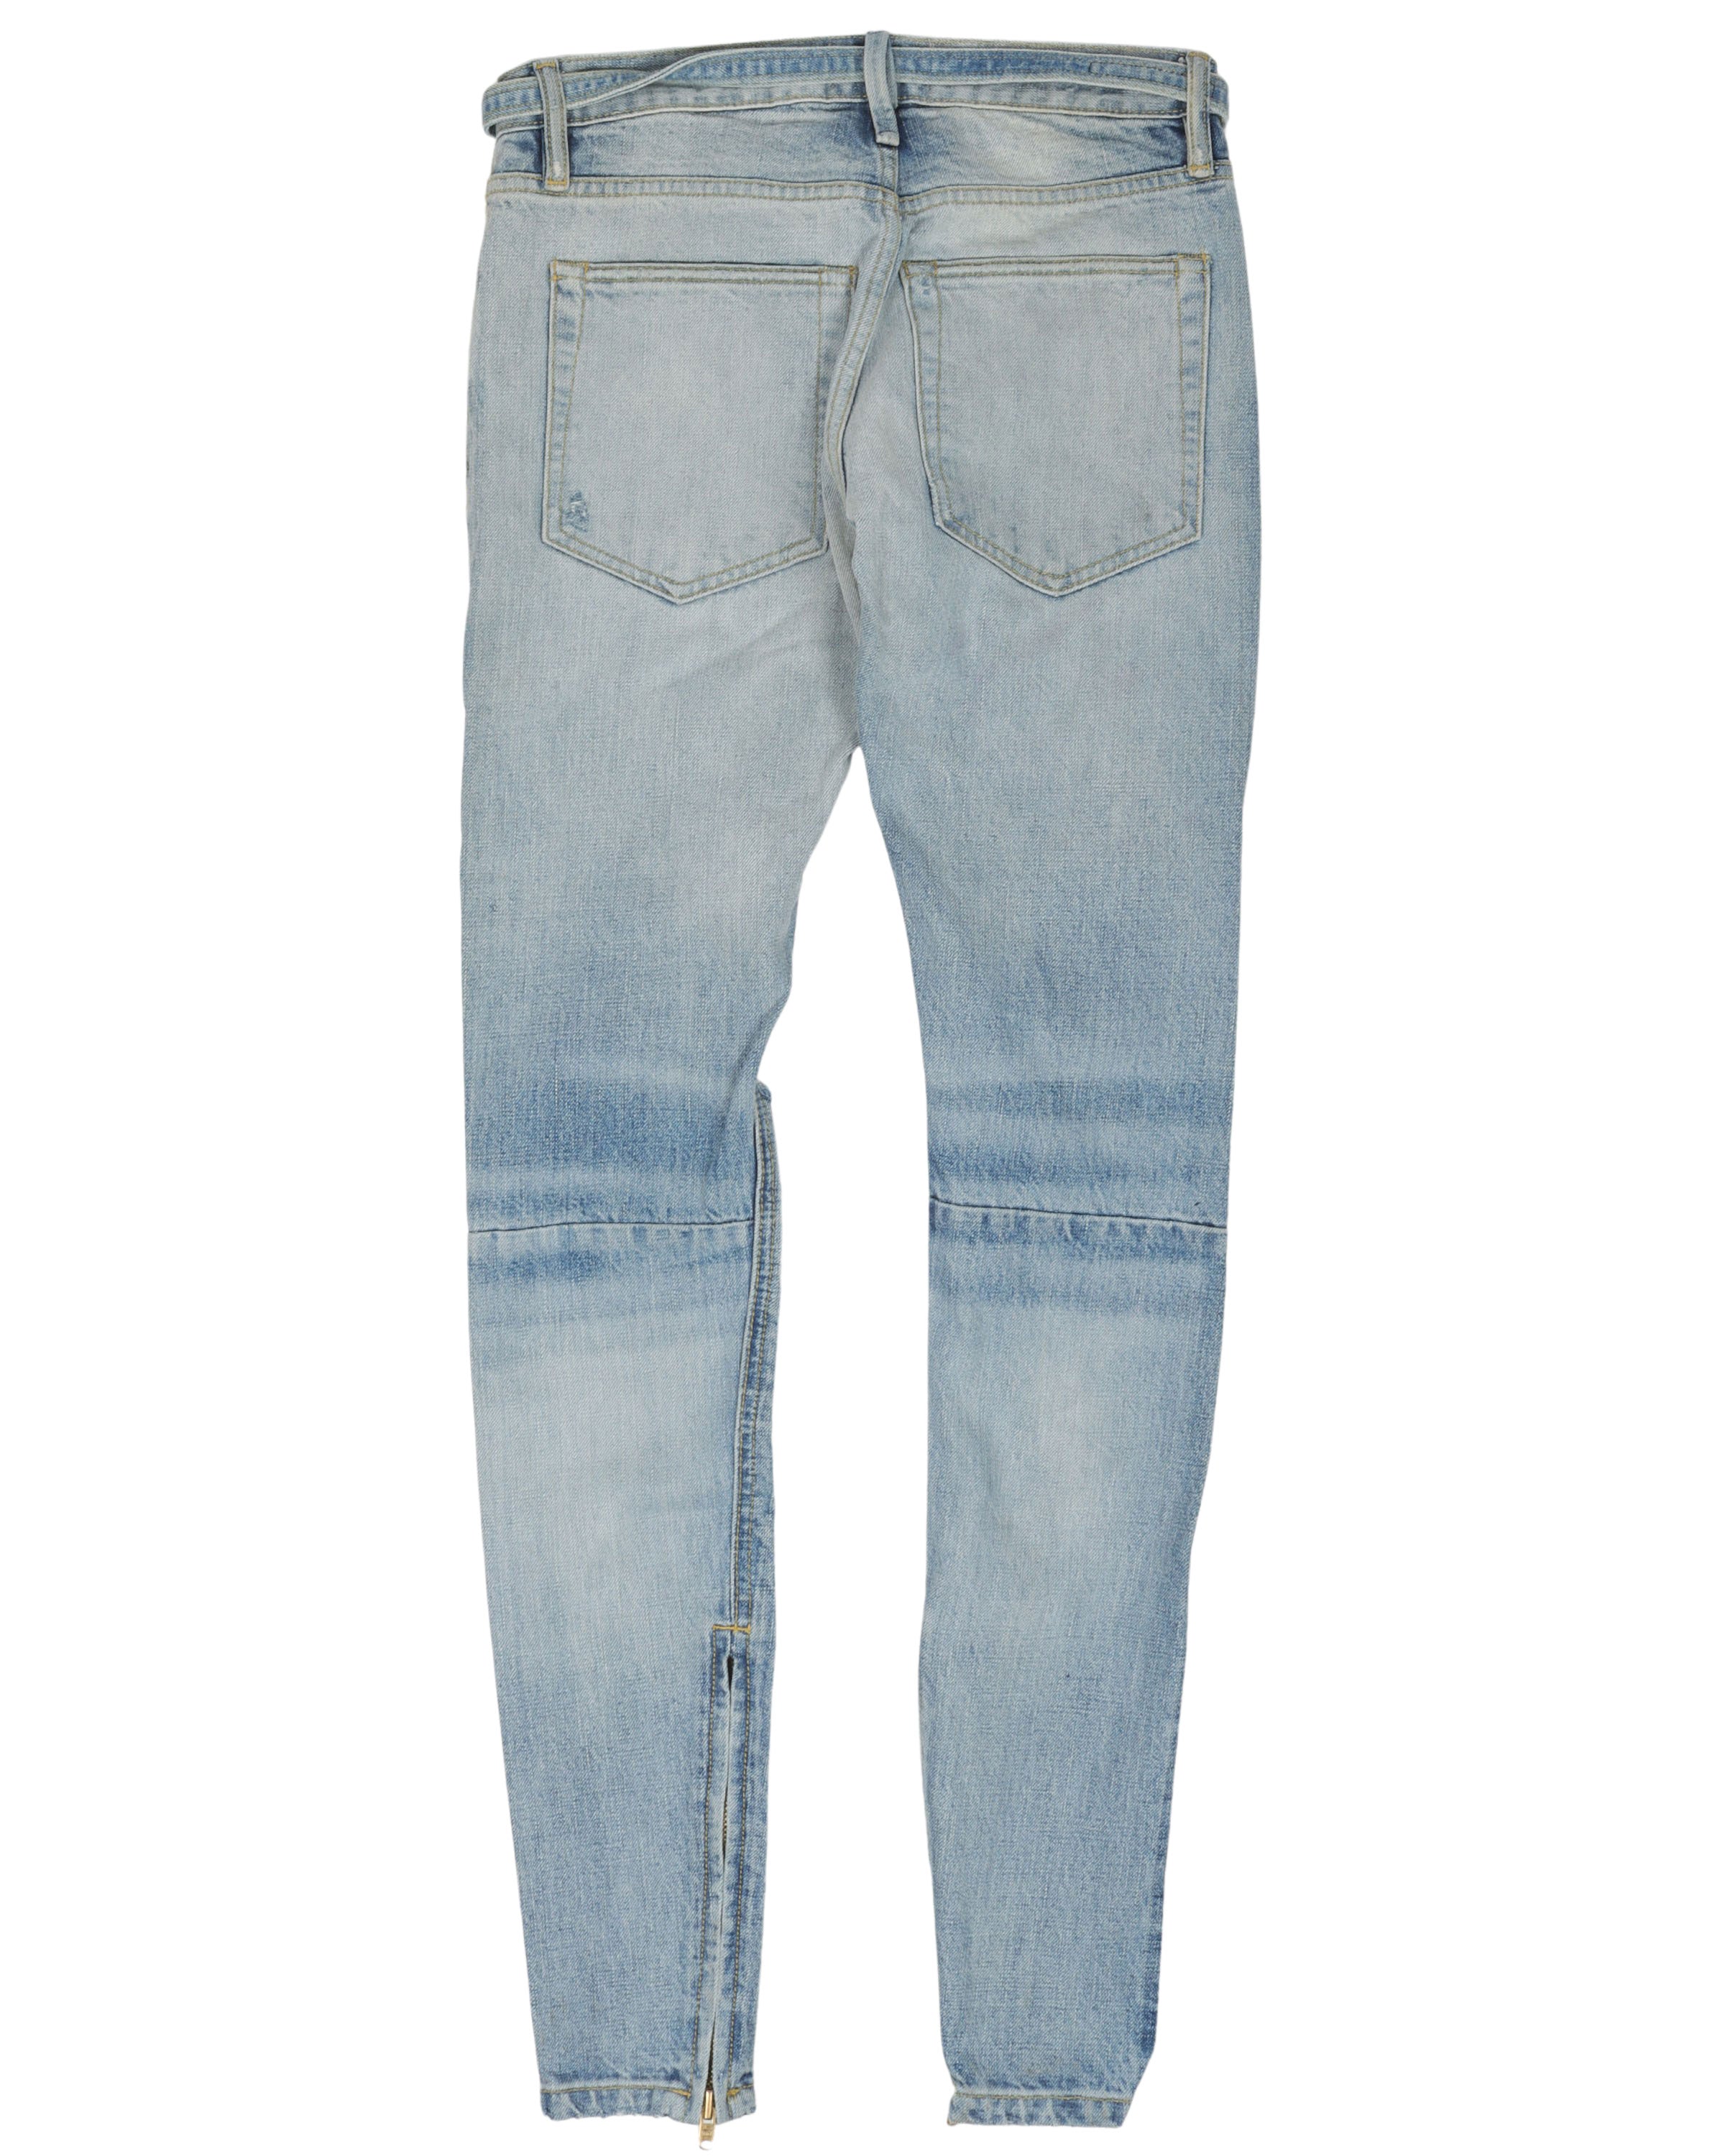 6th Collection Light Wash Jeans